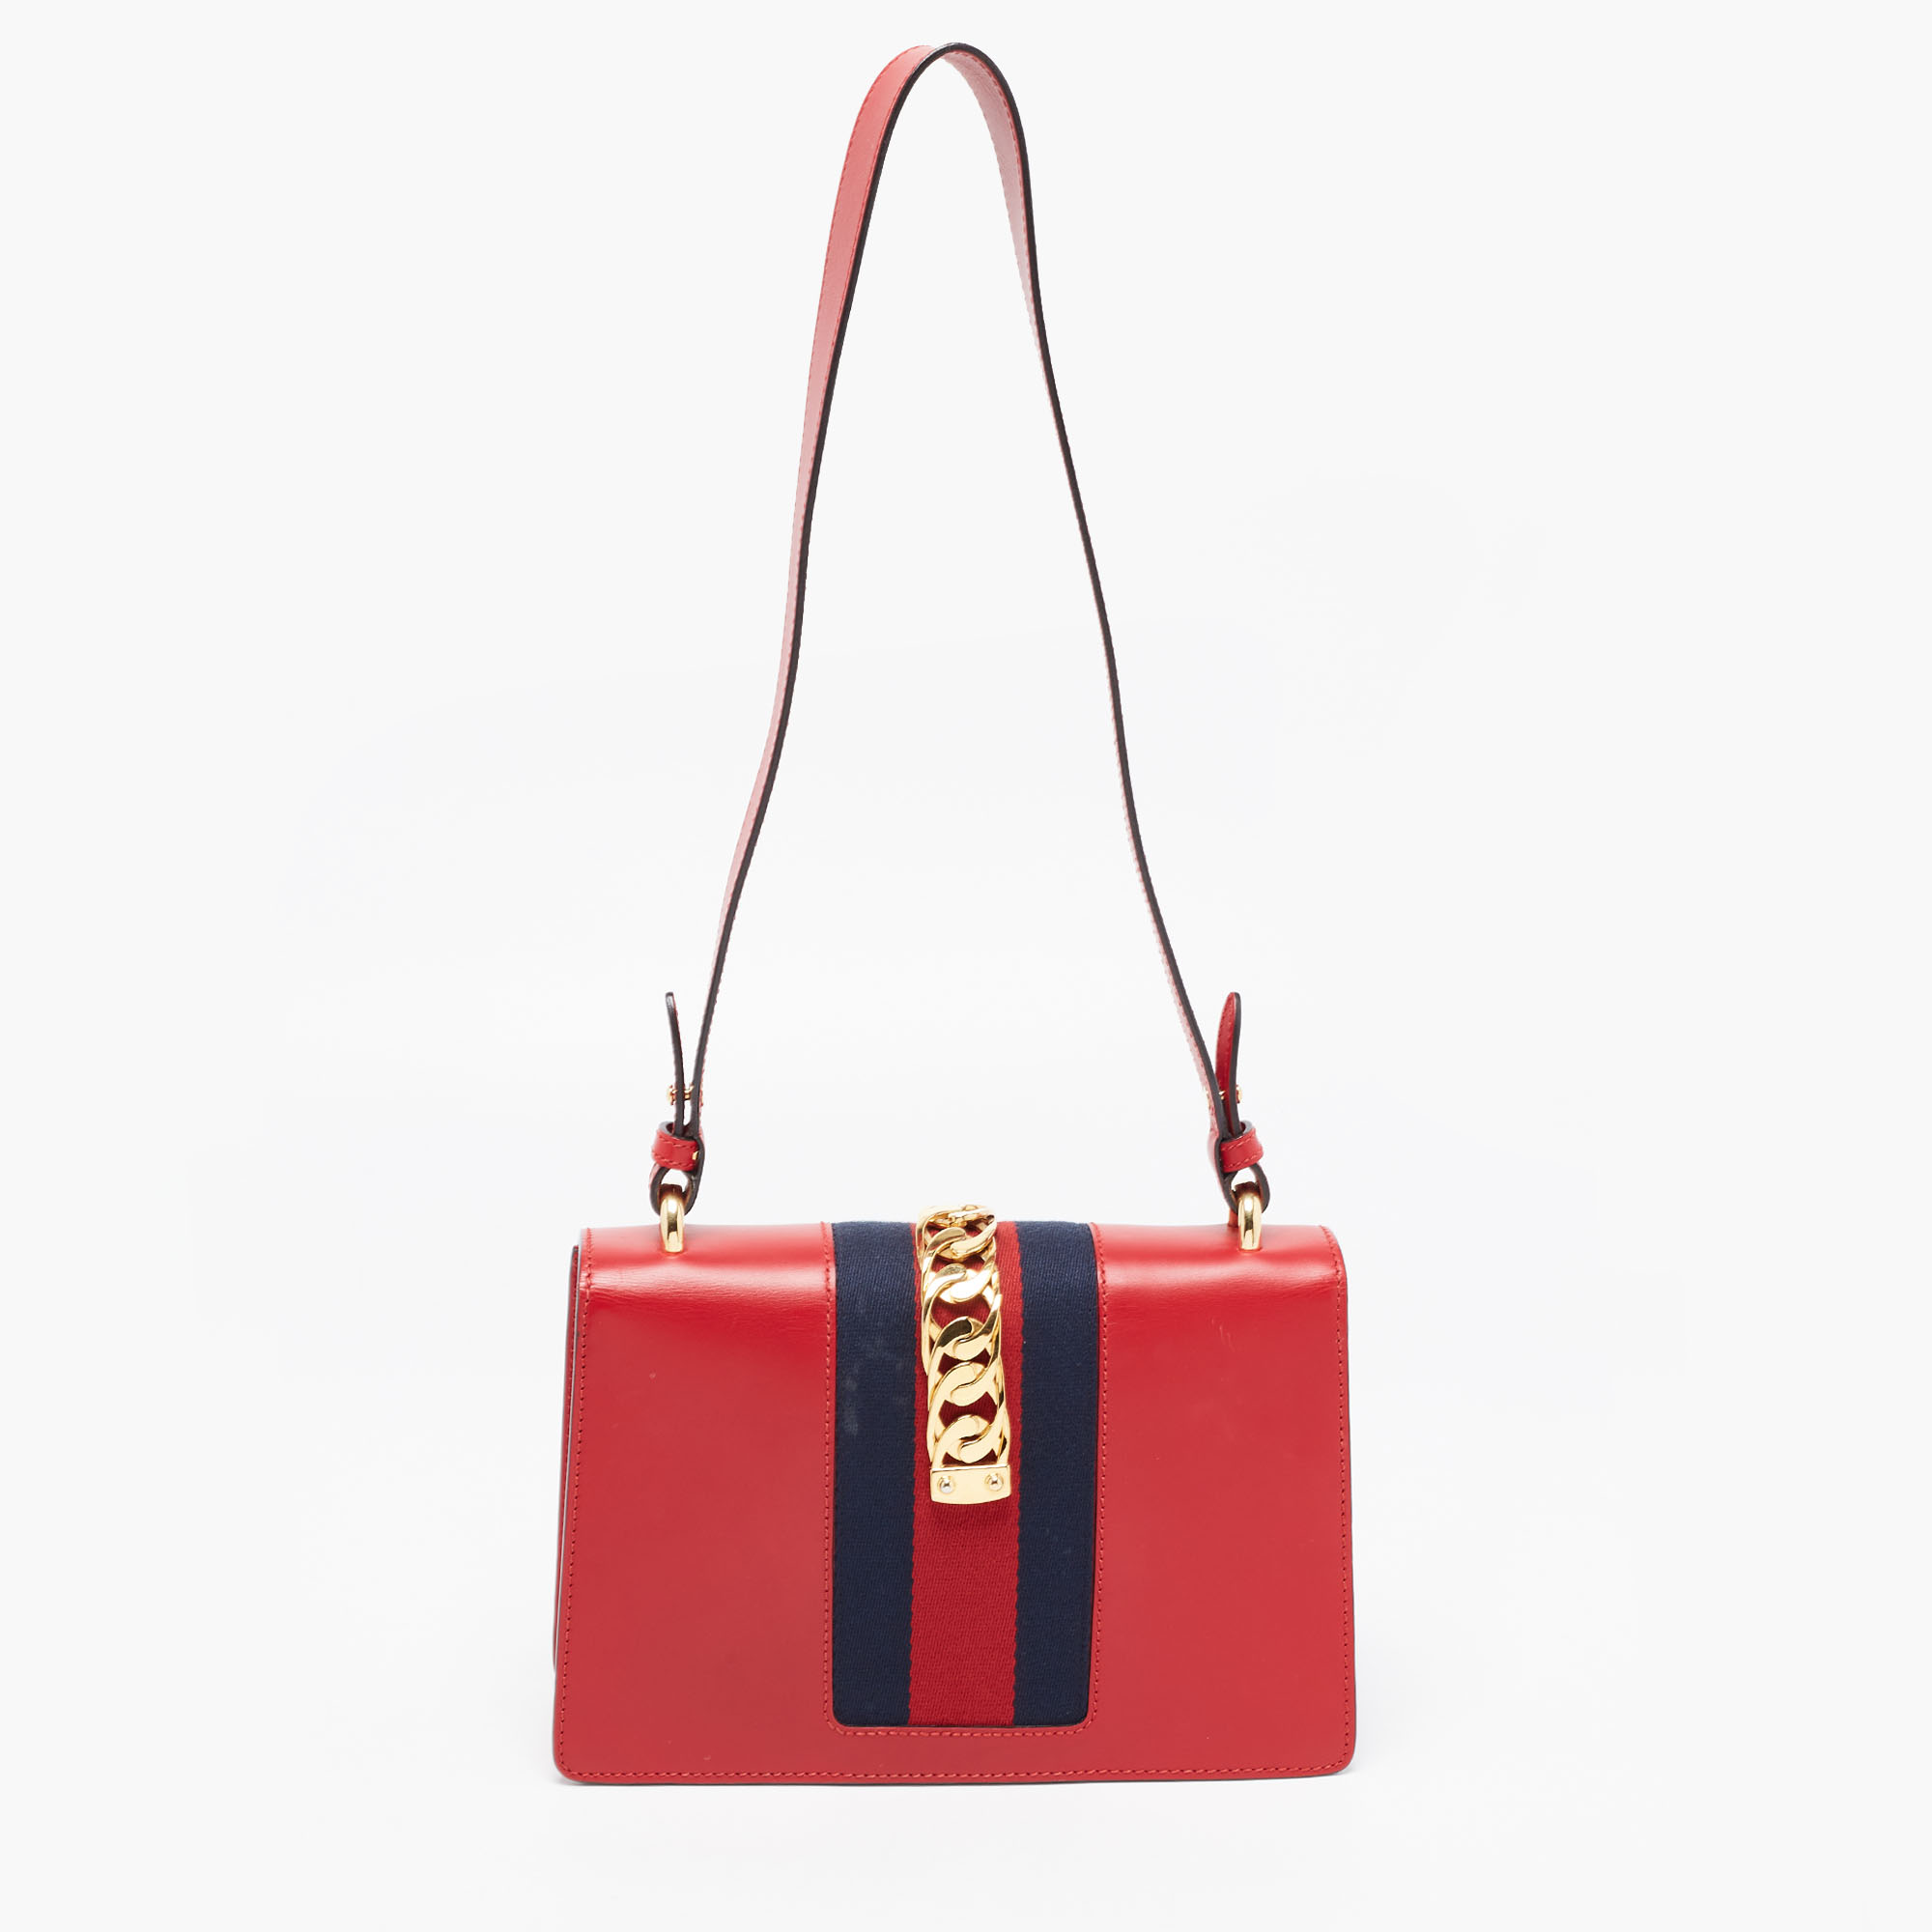 Gucci Red Leather Small Sylvie Web Shoulder Bag